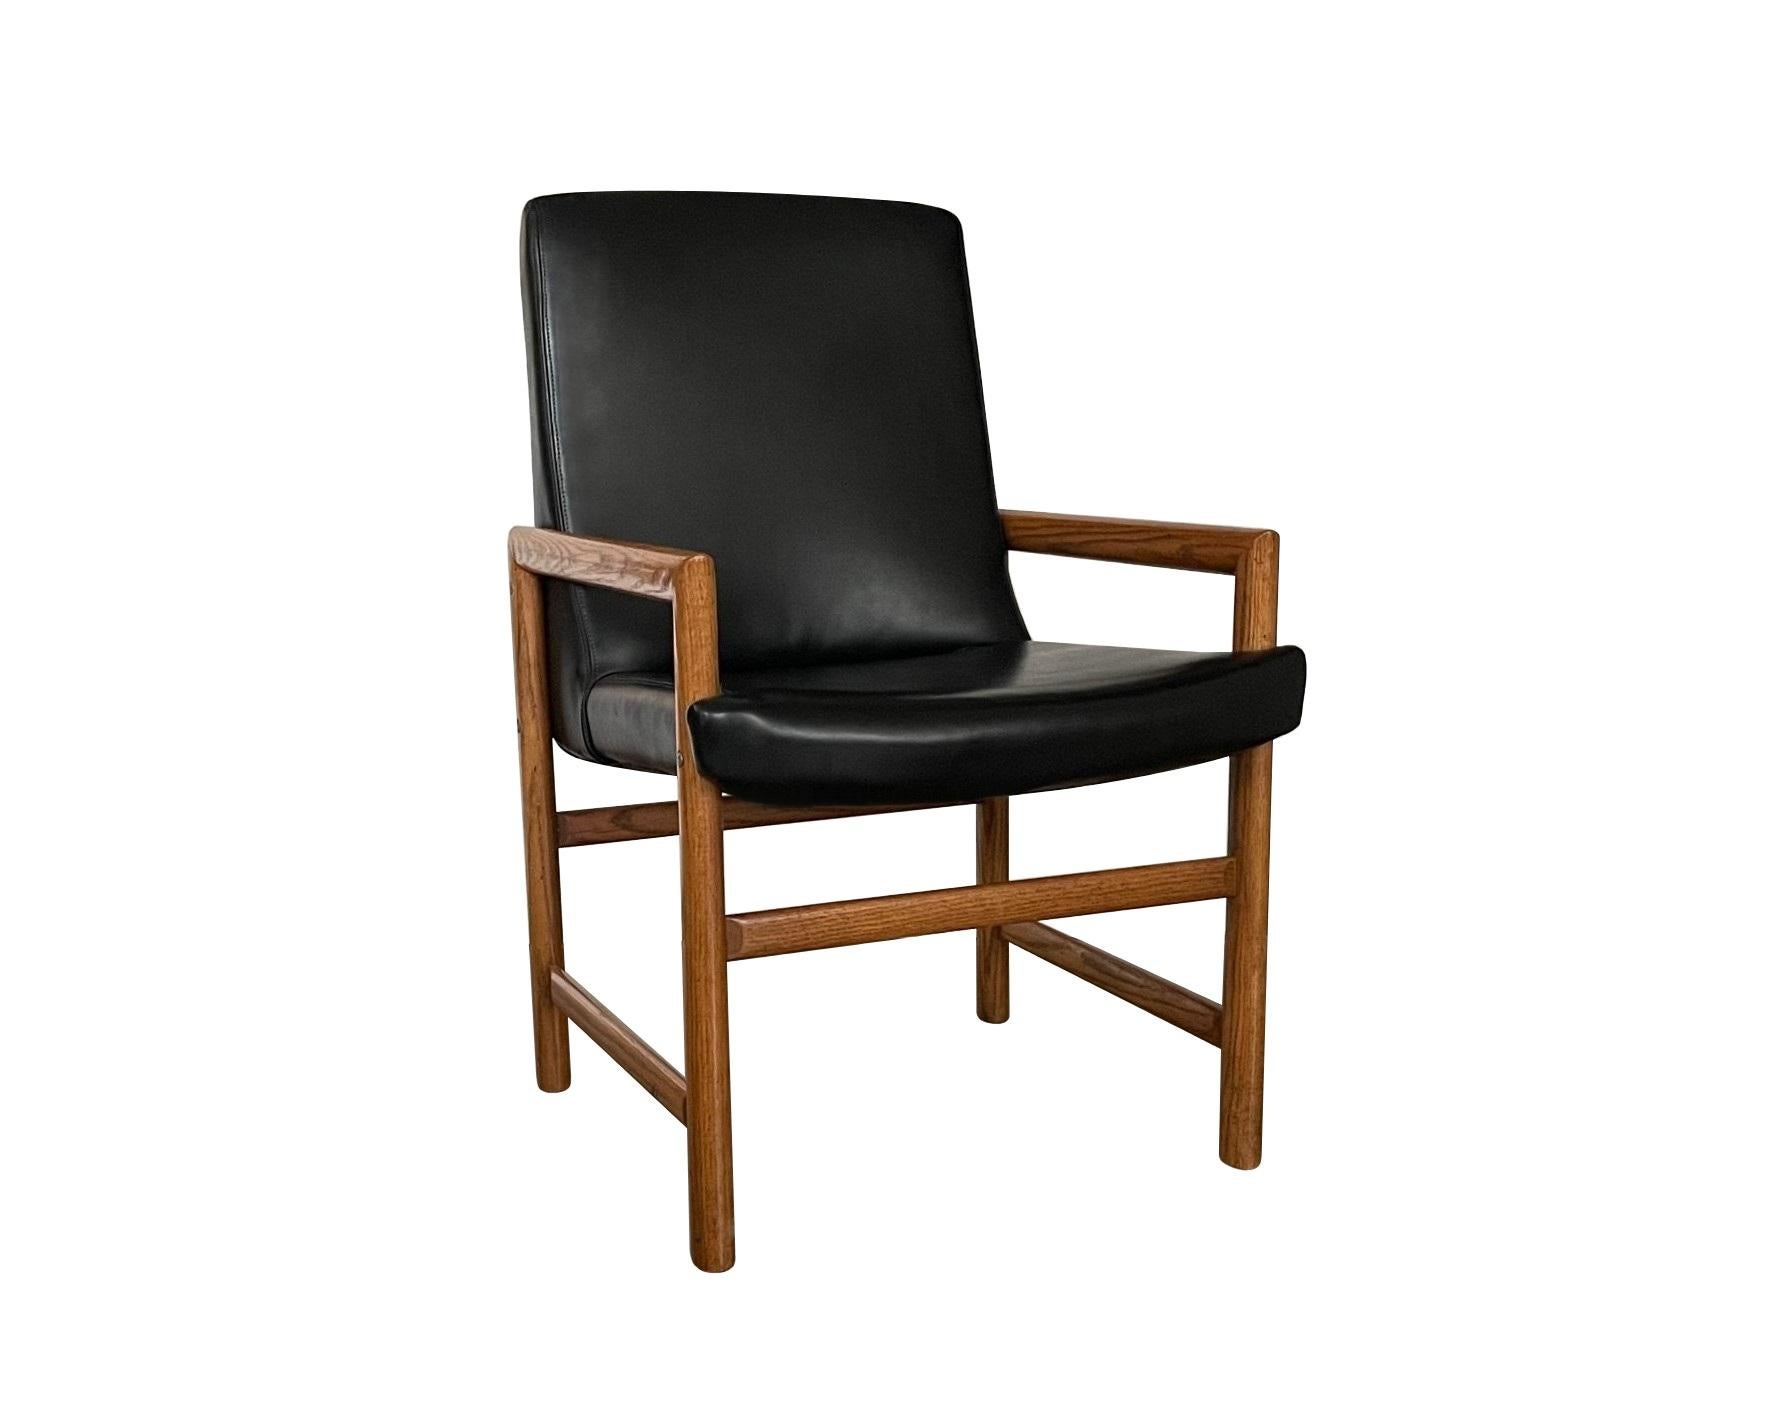 Mid-Century Modern sophistication, for your consideration is a fantastic set of dining armchairs, circa 1970s. A sleek, Minimalist Silhouette with sharply angled arms, built geometrically, blending in aesthetic while lending support and comfort.